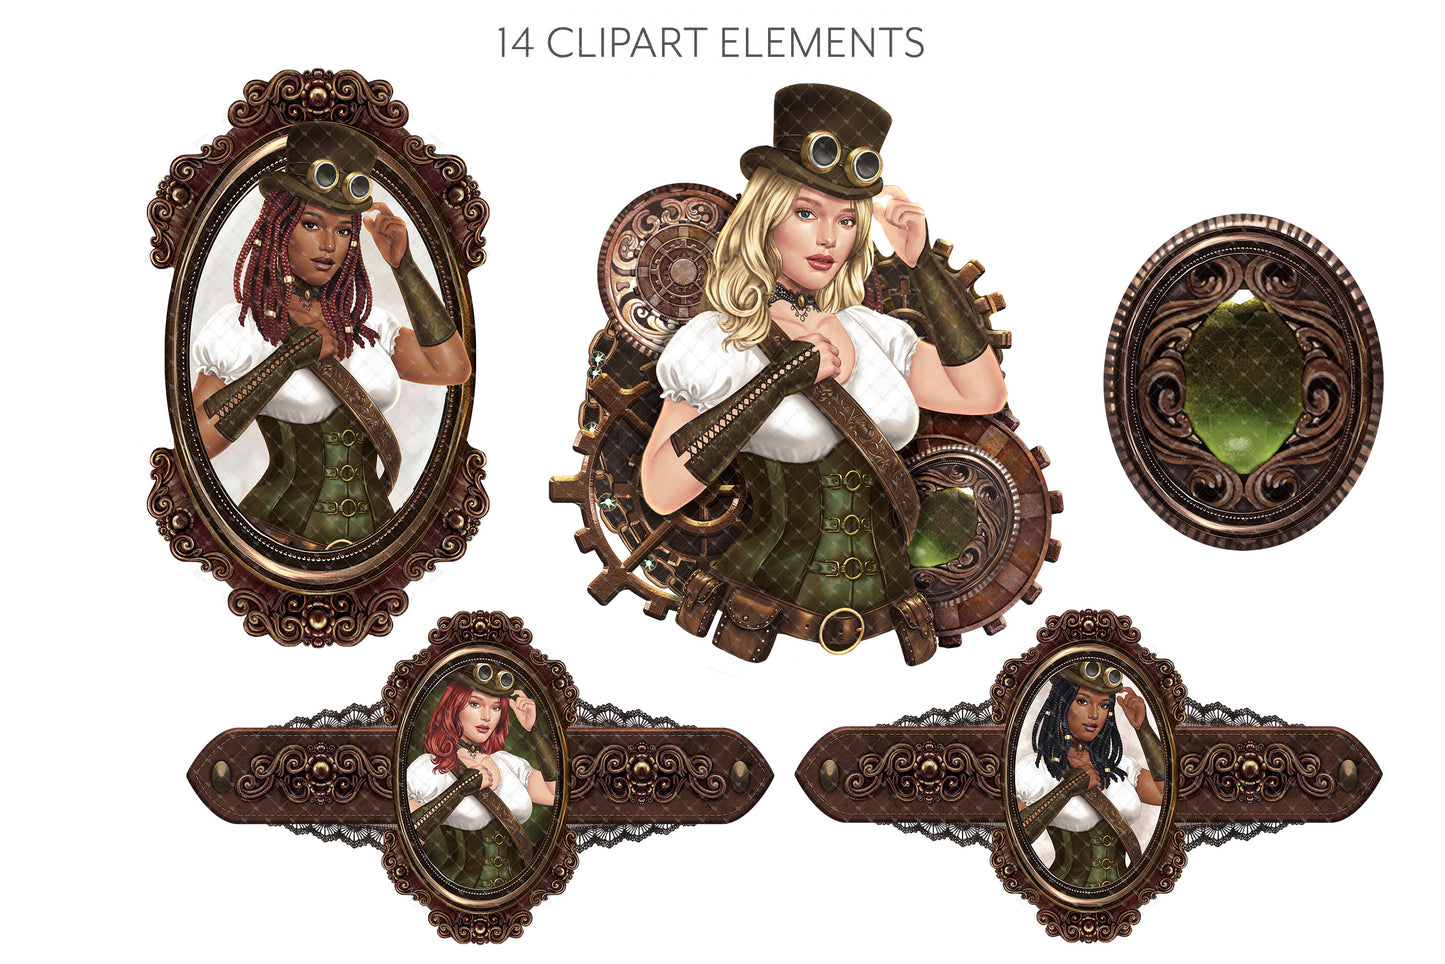 Victorian Steampunk Clip Art, Gothic Fashion png, Cosplay Fashion illustration, Gears Lace Leather Locket Pocketwatch, Planner, Scrapbooking